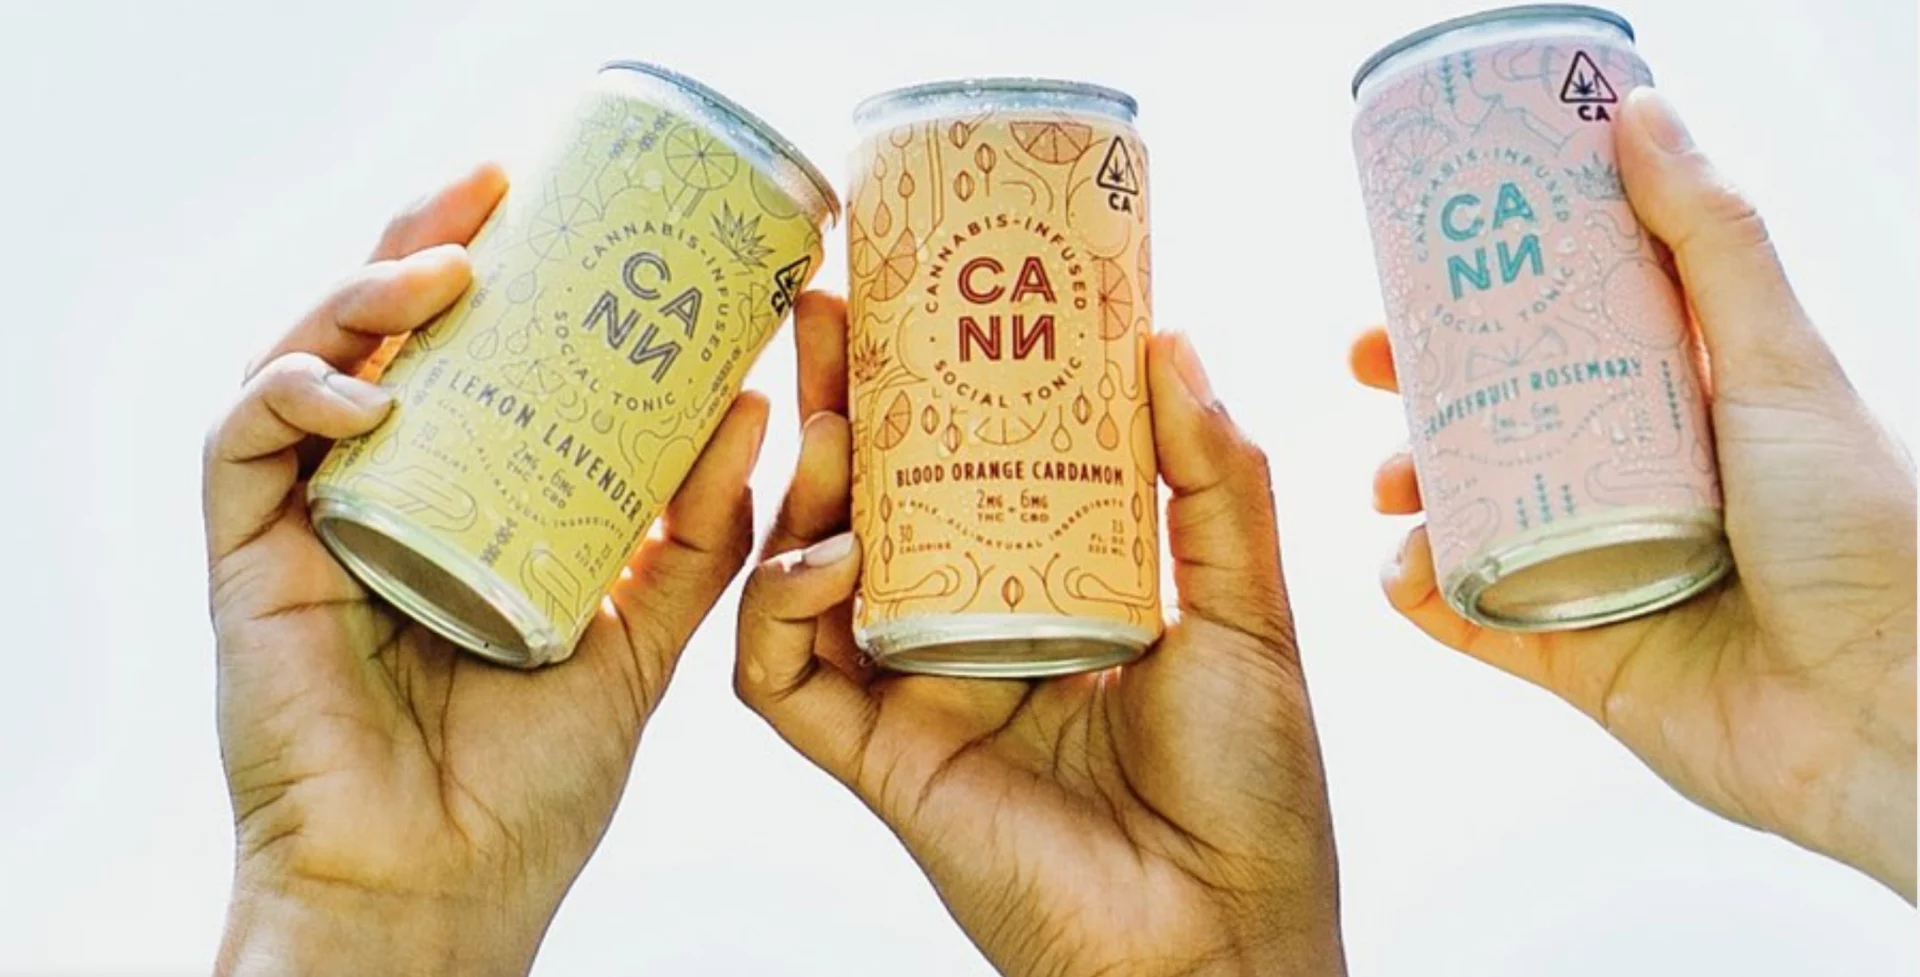 Refreshing Cannabis-Infused Drinks from CANN